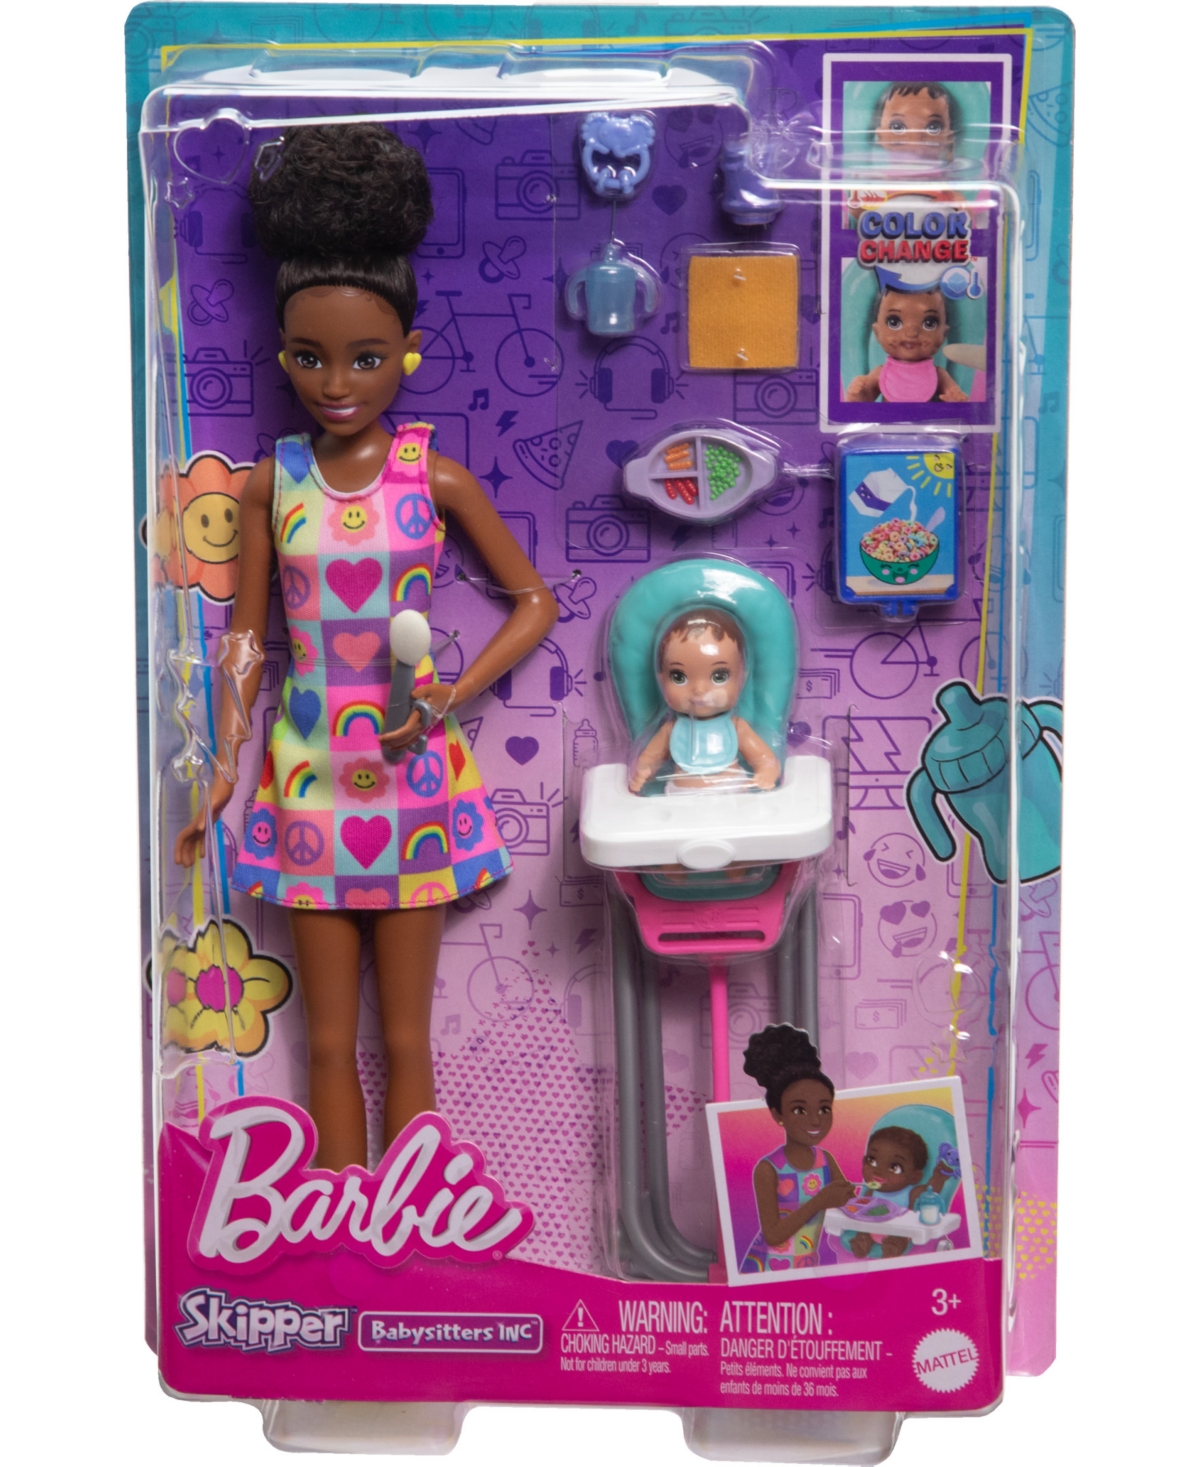 Shop Barbie Skipper Babysitters Inc. And Play Set, Includes Doll With Black Hair, Baby, And Mealtime Accessories In Multi